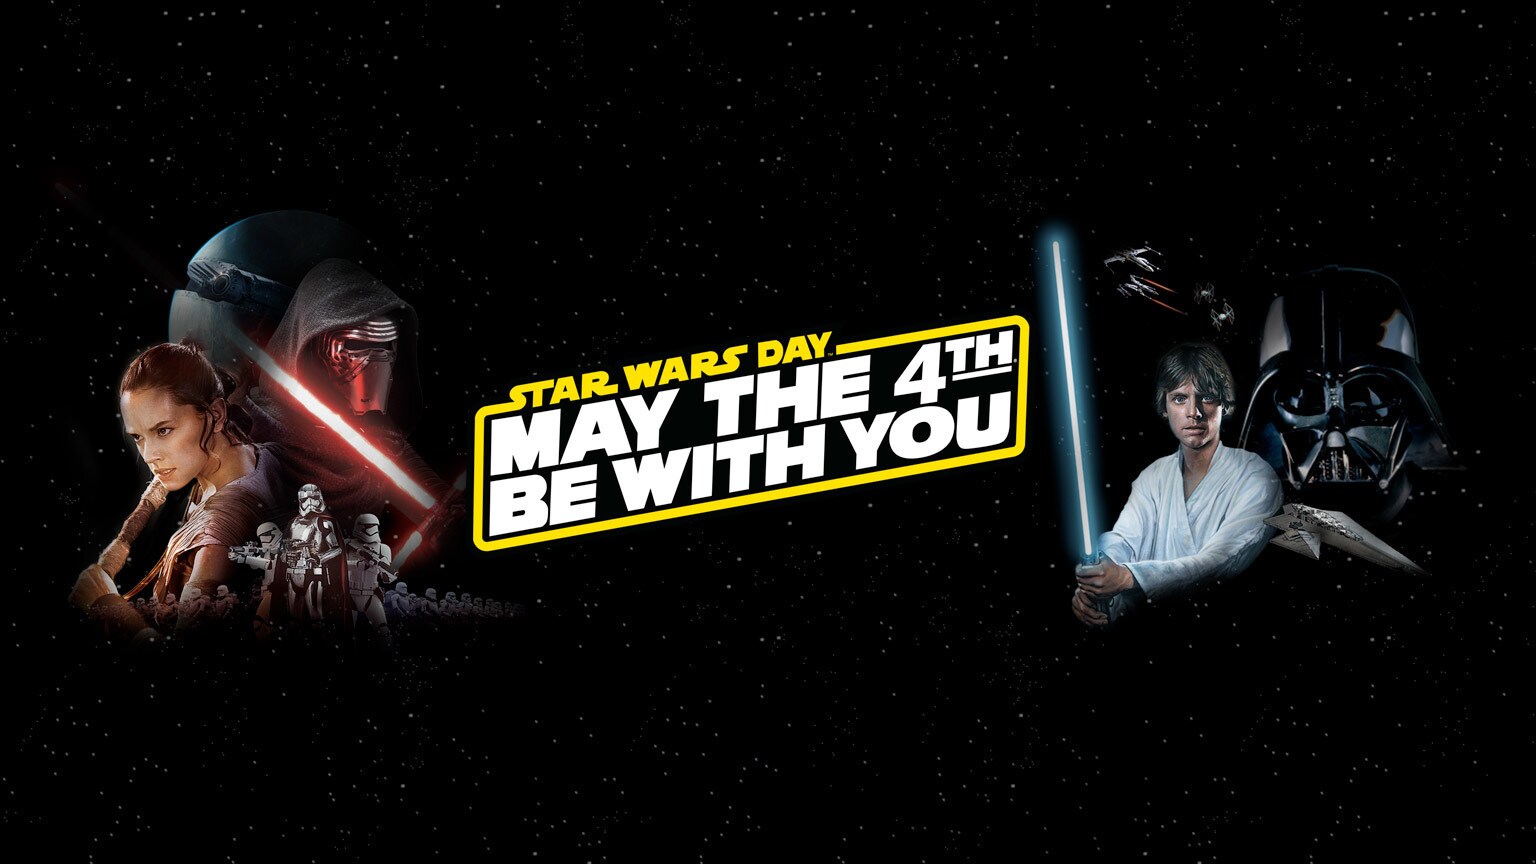 Star Wars Day 2016 Gaming Deals!